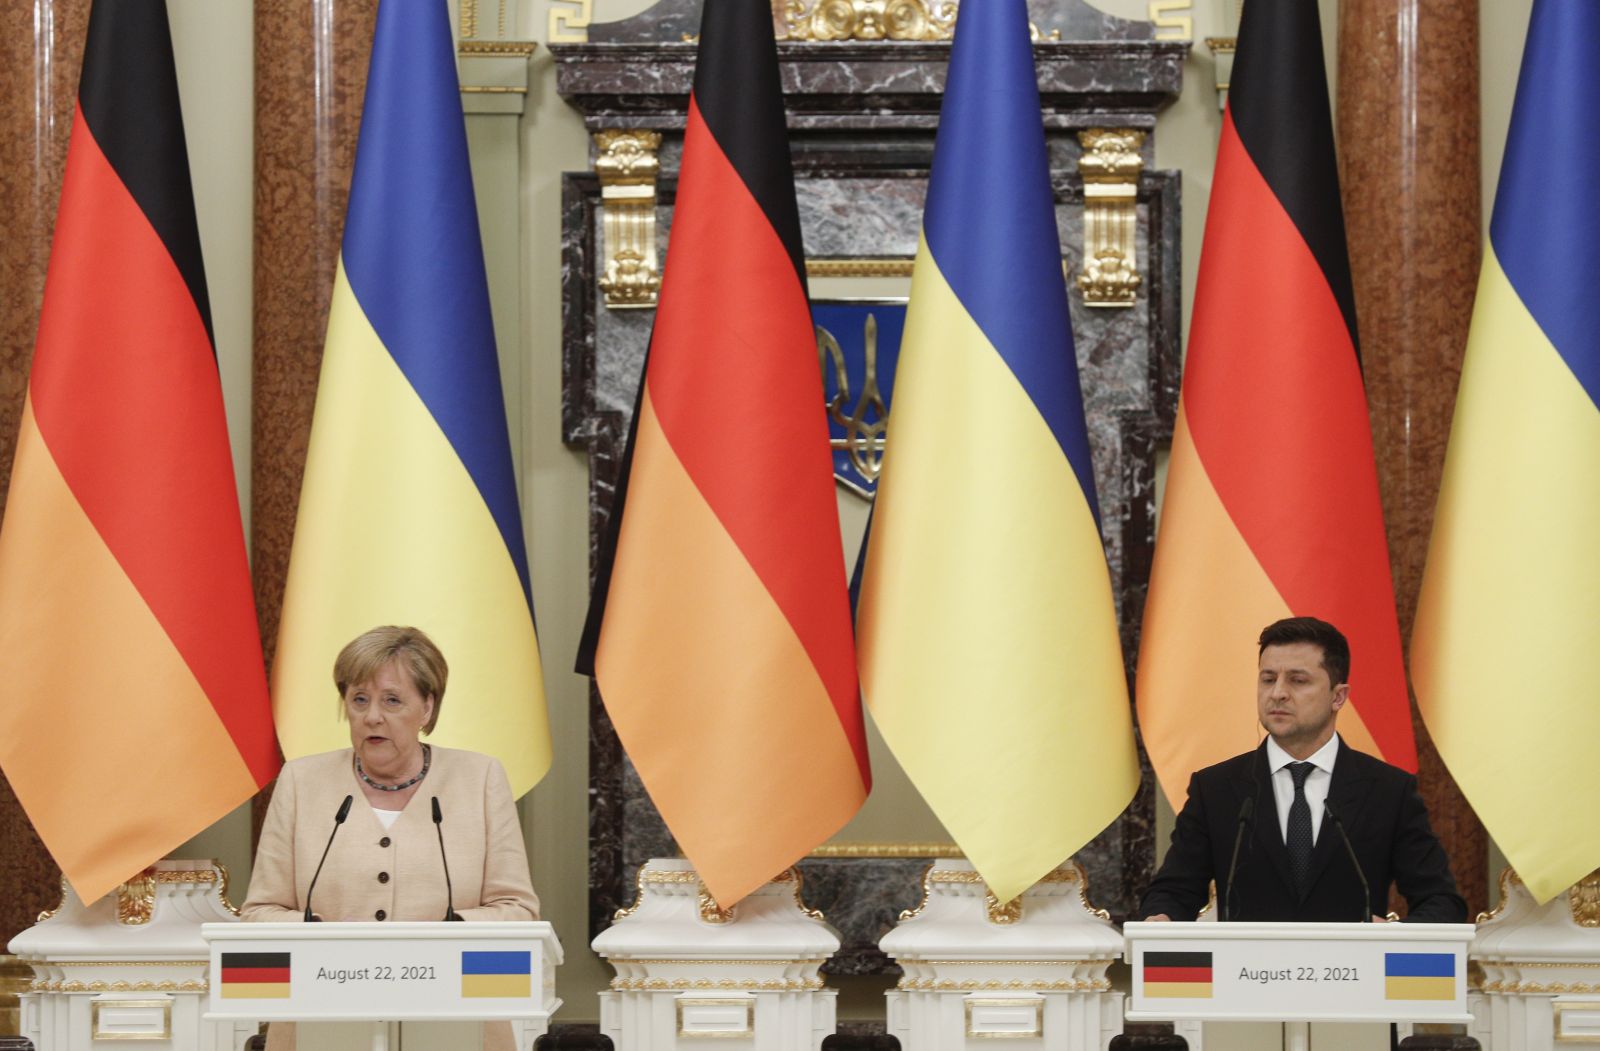 epa09424586 German Chancellor Angela Merkel (L) and Ukrainian President Volodymyr Zelensky (R) attend a joint news conference following their talks at the Mariinsky Palace in Kiev, Ukraine, 22 August 2021. Merkel arrived in Kiev for a working visit to meet with top Ukrainian officials.  EPA/SERGEY DOLZHENKO / POOL